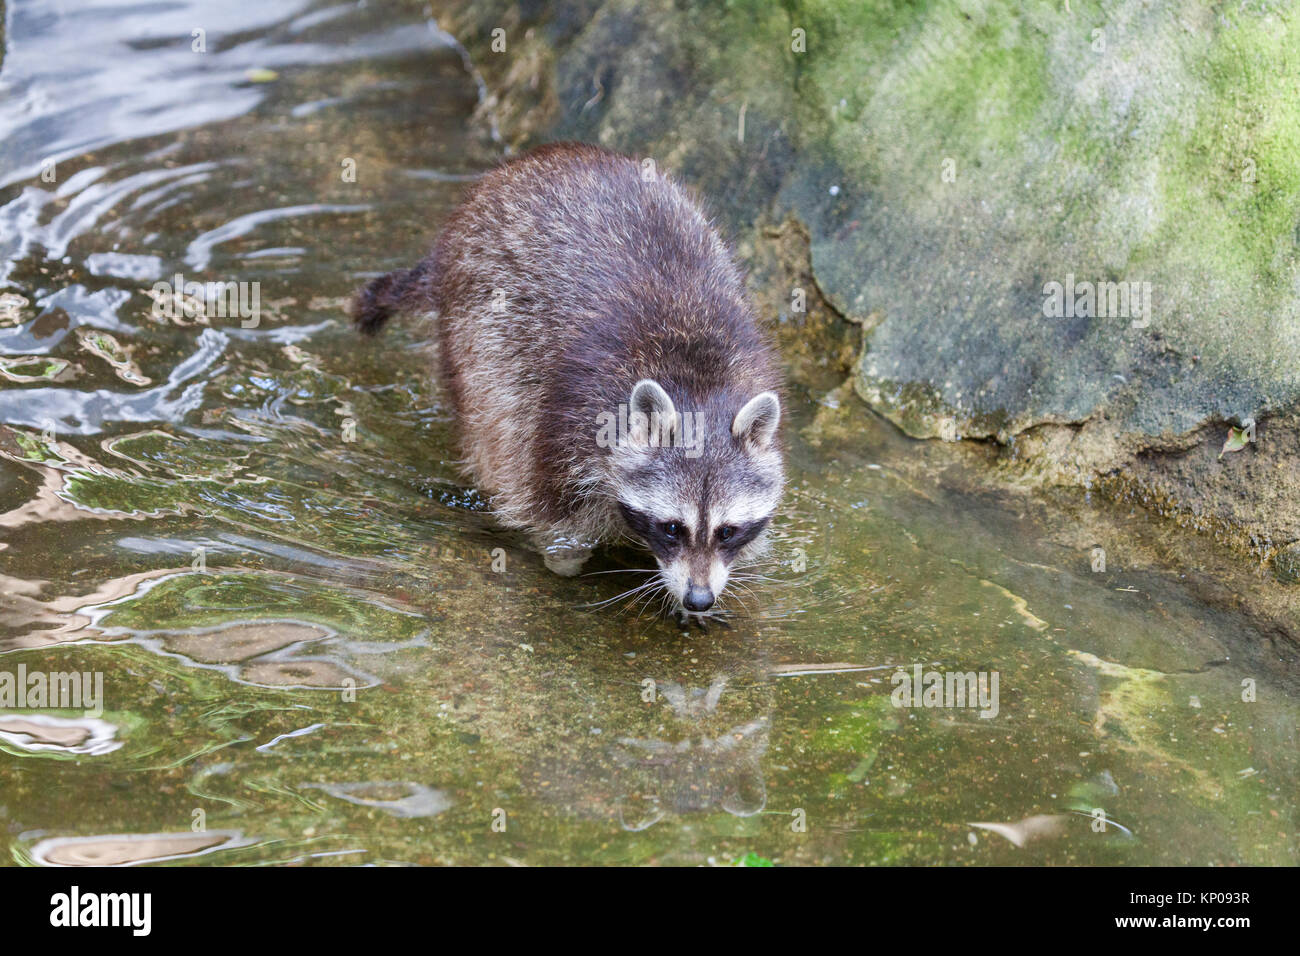 portrait of a racoon in a nature scene Stock Photo